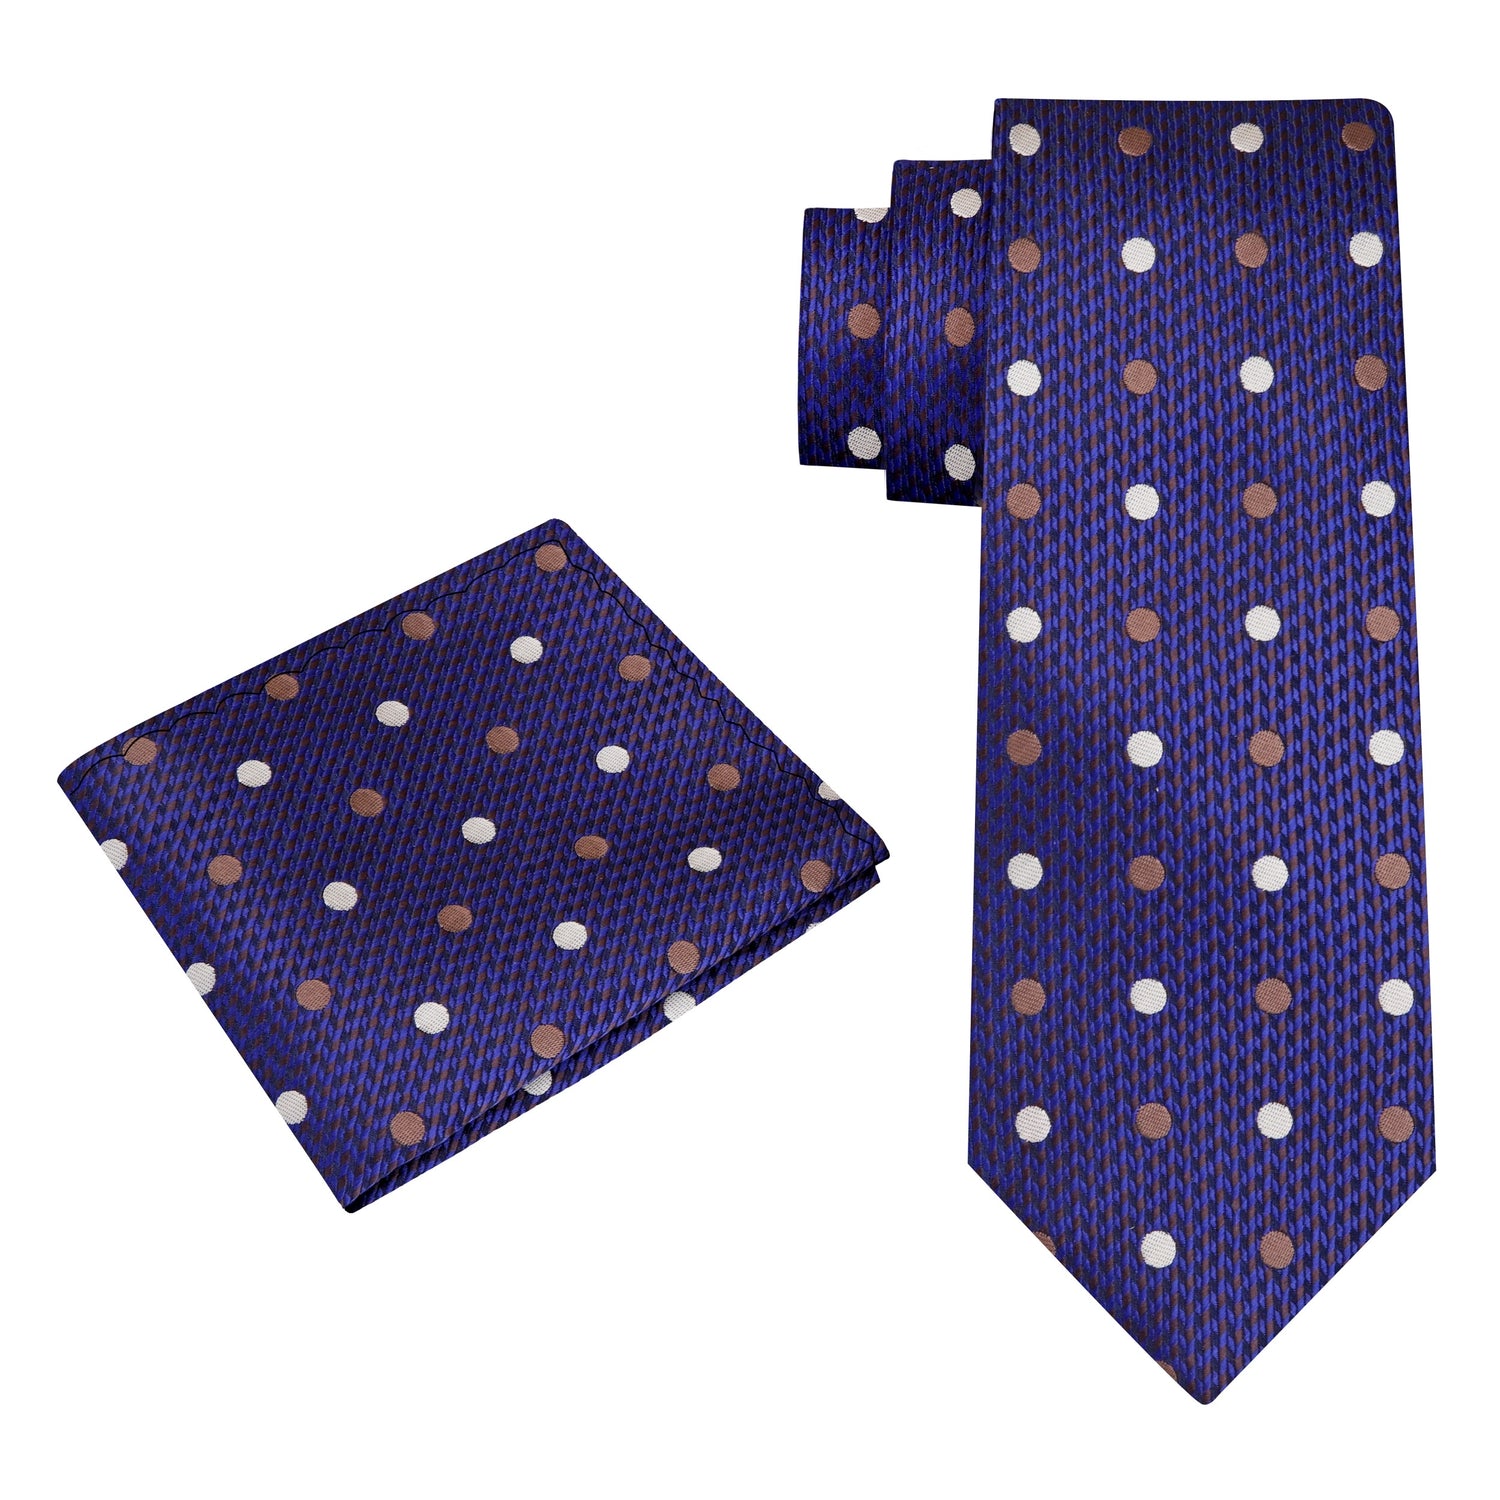 View 2: Dark Blue, Gold and Brown Polka Tie and Square